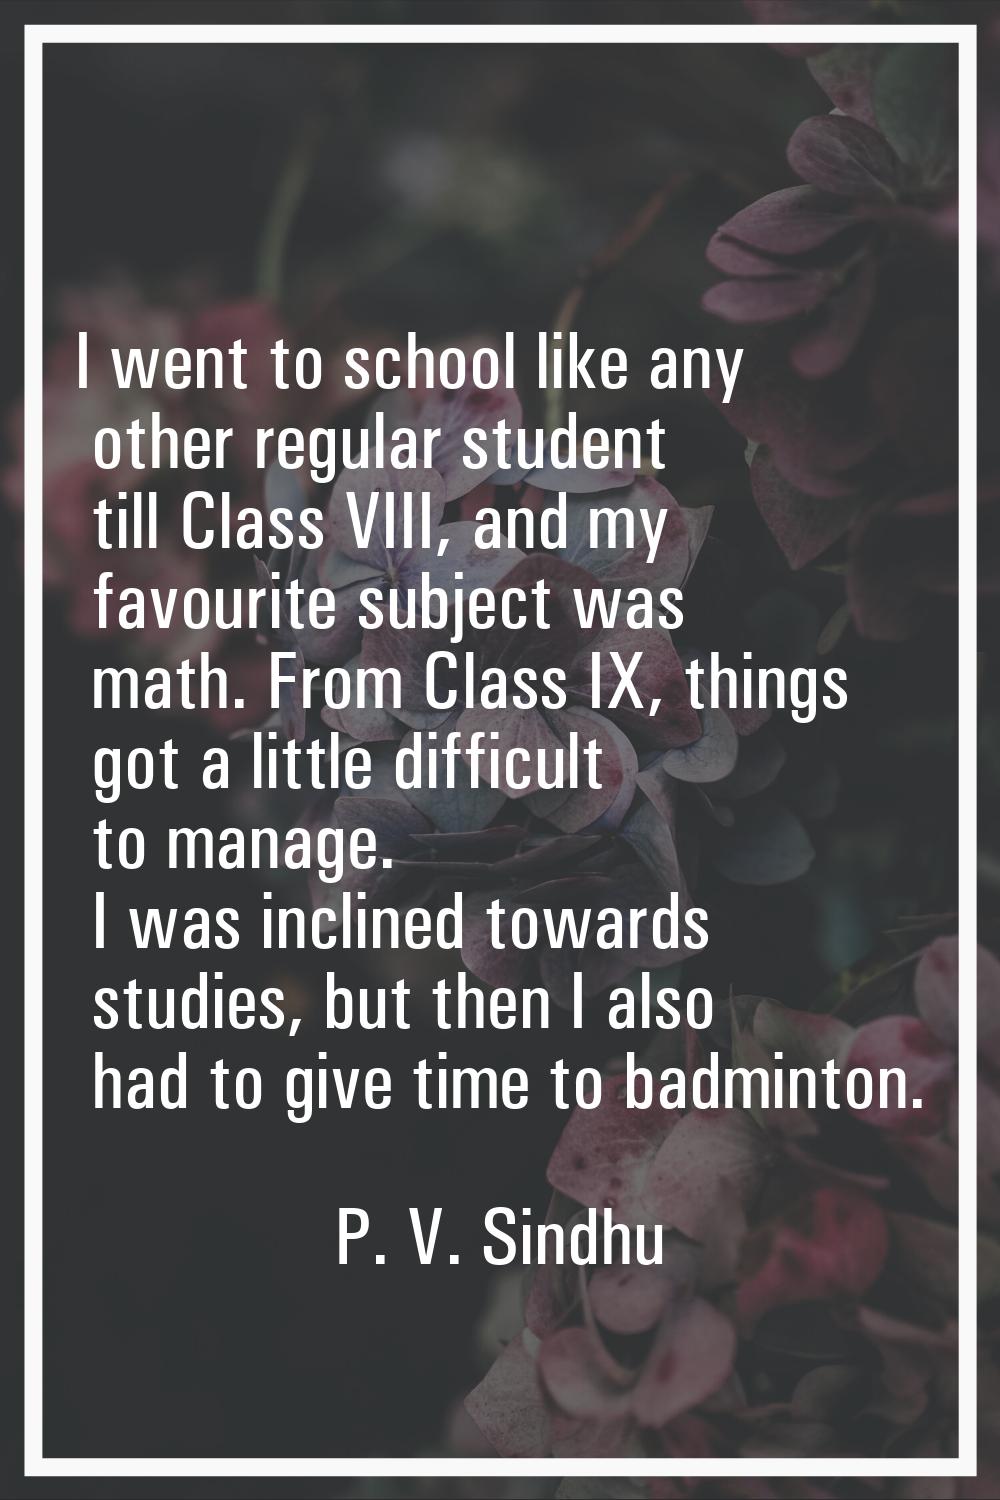 I went to school like any other regular student till Class VIII, and my favourite subject was math.